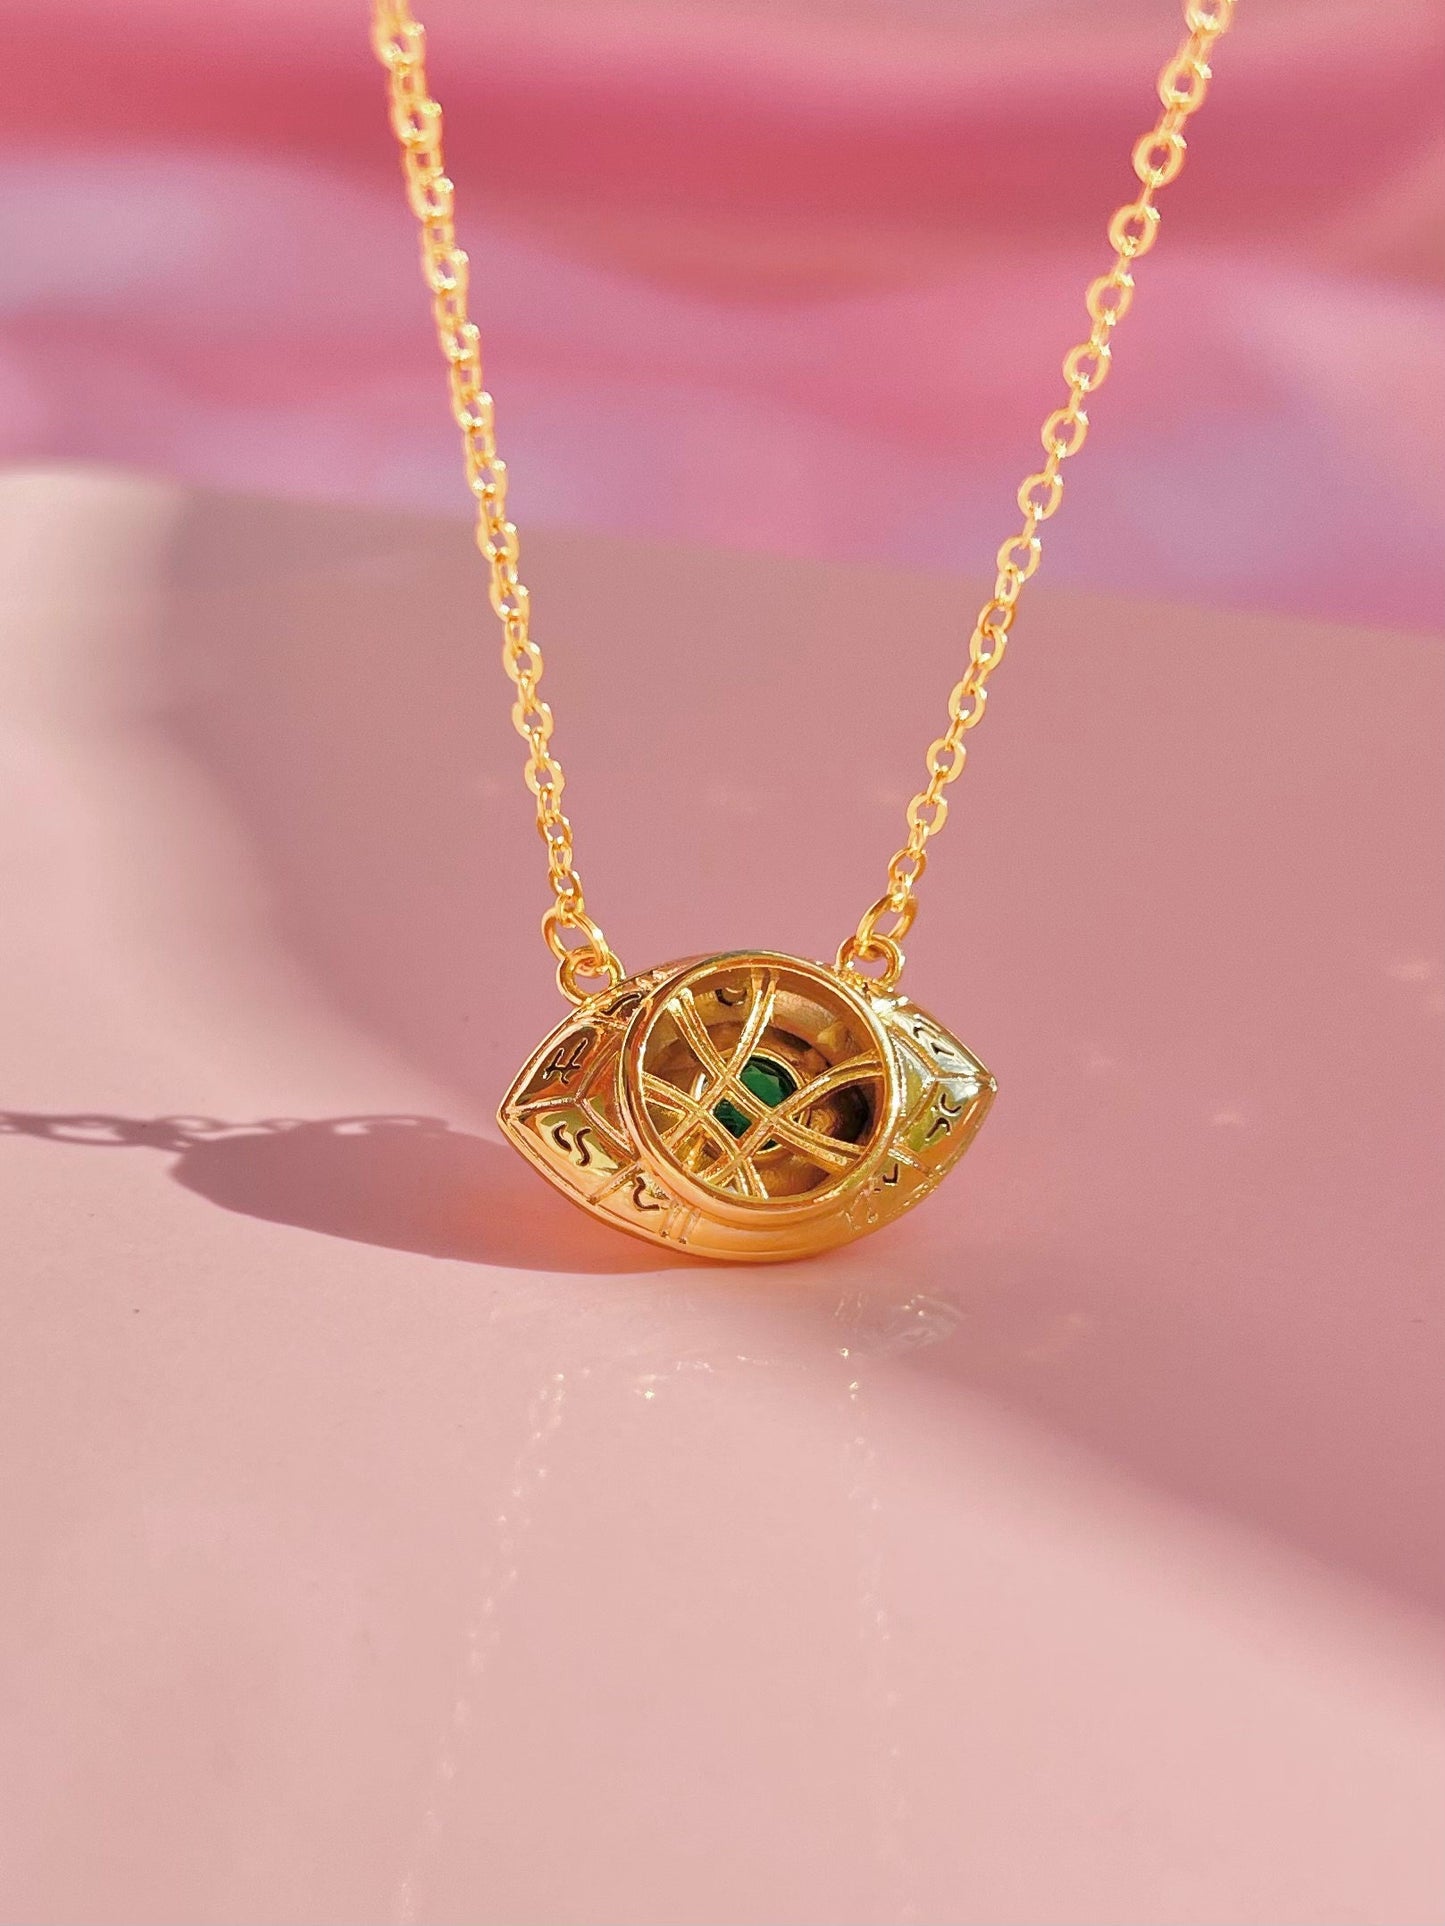 Eye of Agamotto Signet Necklace, Doctor Agamotto Necklace, Geek Jewelry, Superhero Necklace, Avengers Necklace, Doctor Spider